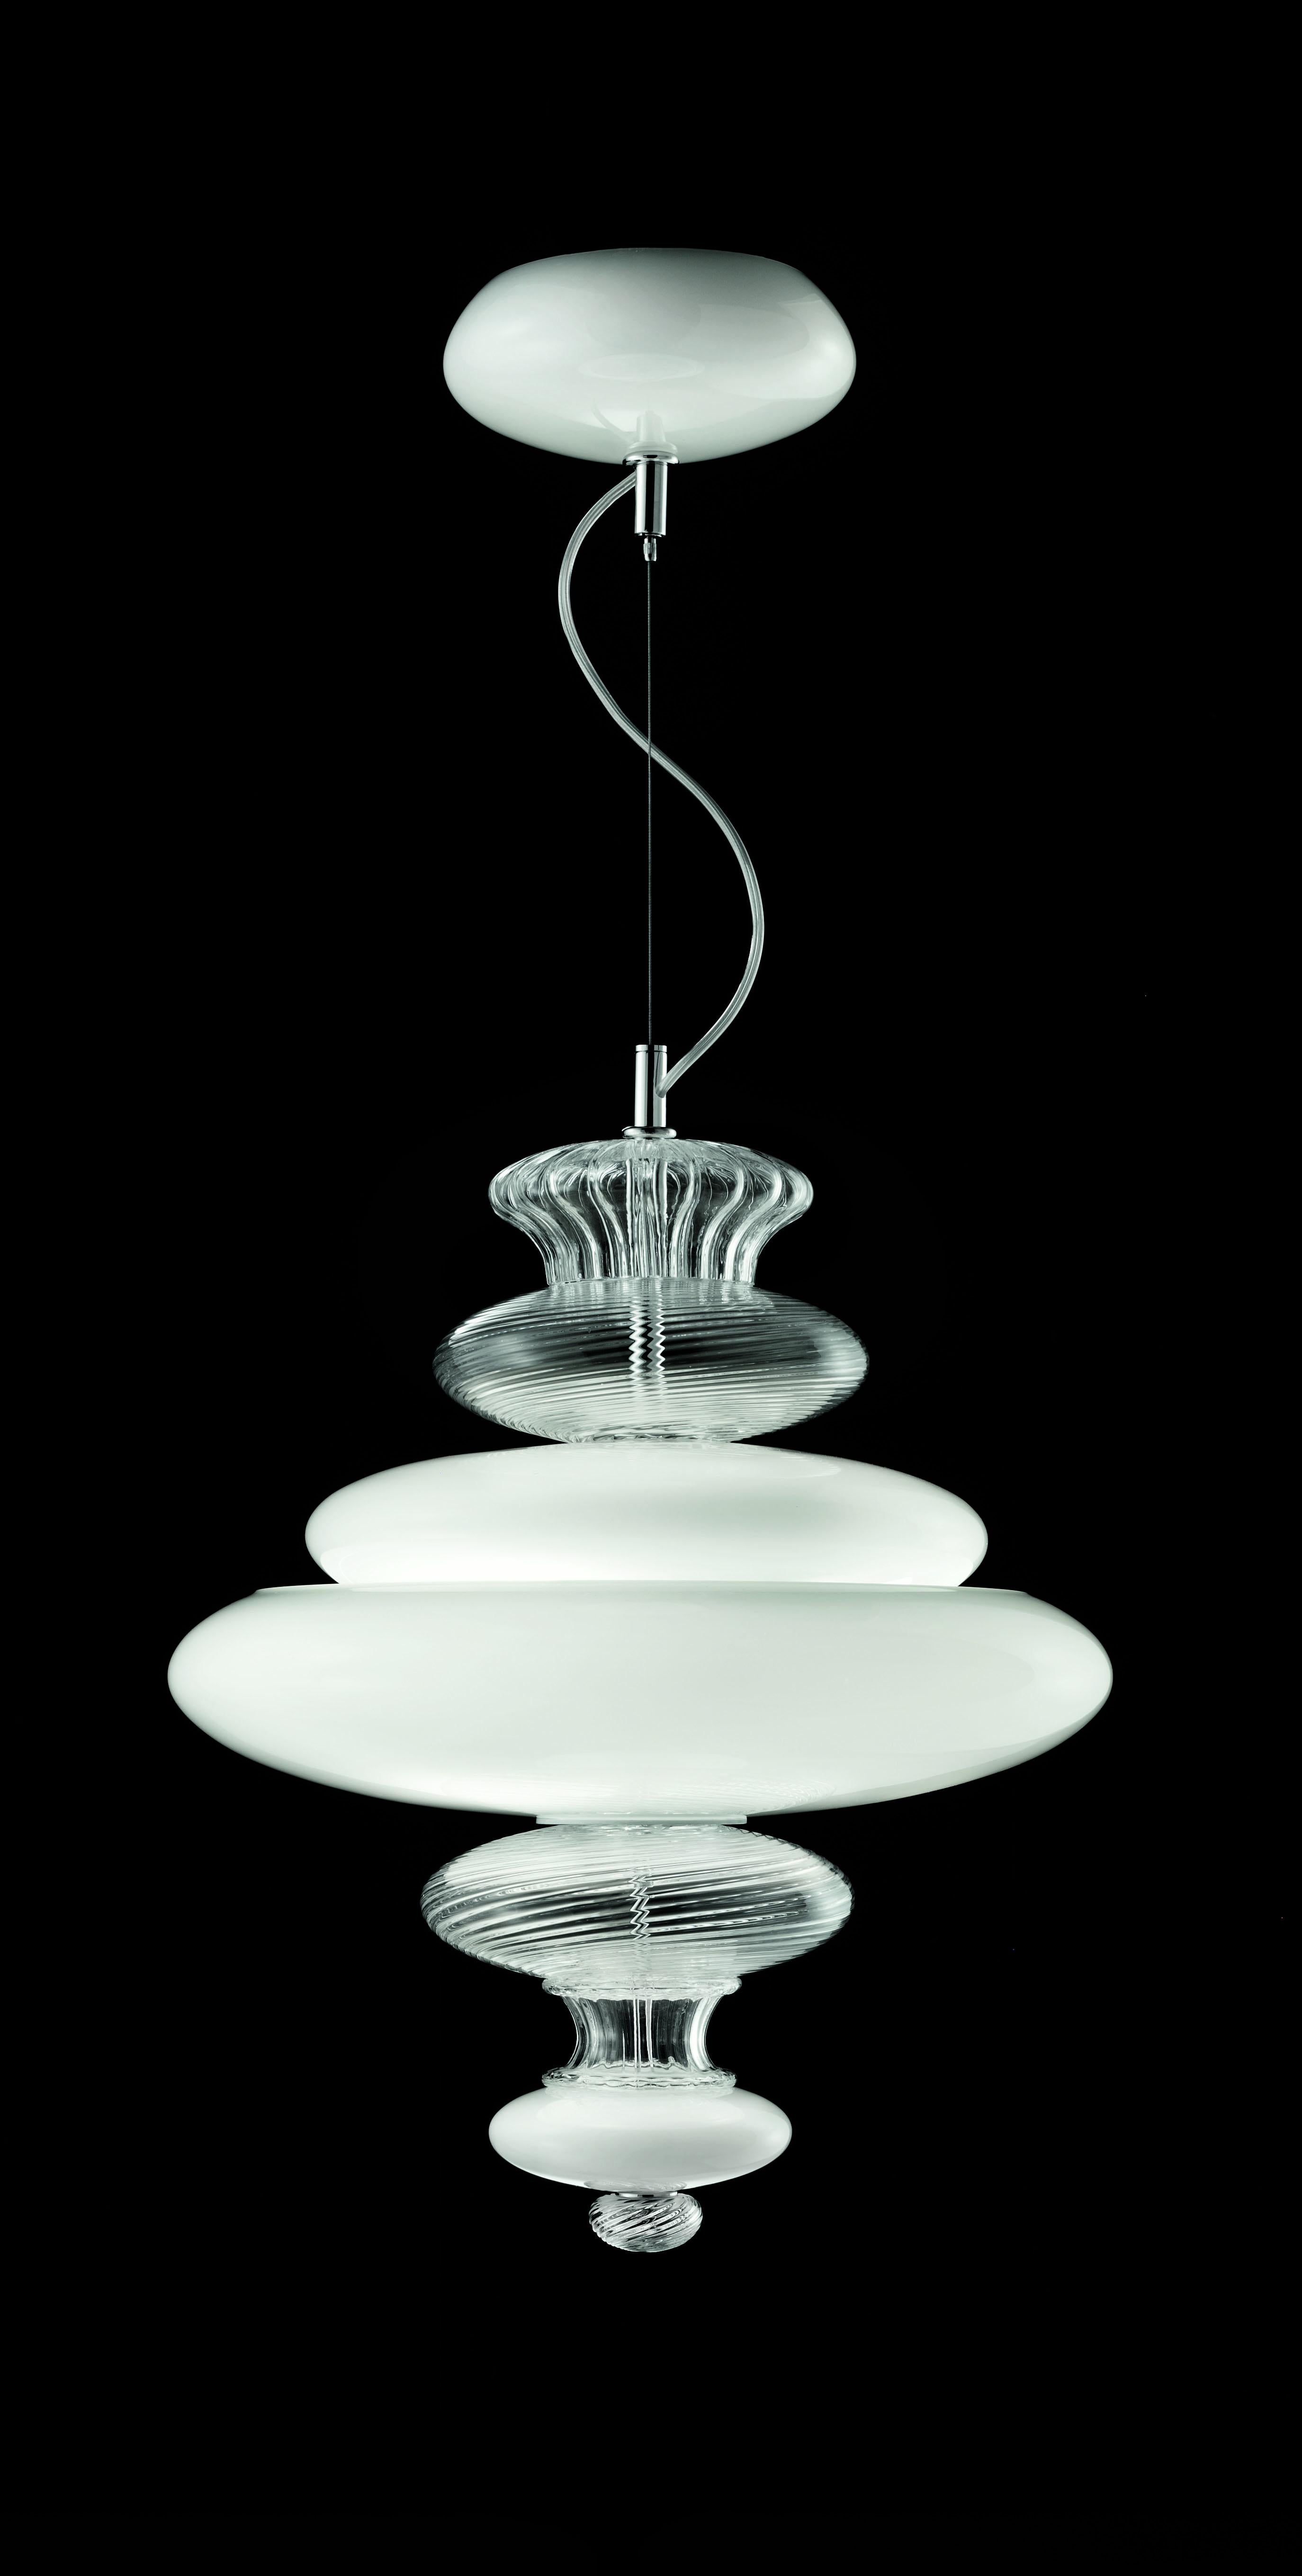 The Pigalle 5693 suspension lamp in white/crystal glass and polished chrome finishing, is an extremely modern and complete collection, with the character of the glass-making tradition. In addition to chandeliers, table lamps, ceiling lamps and wall